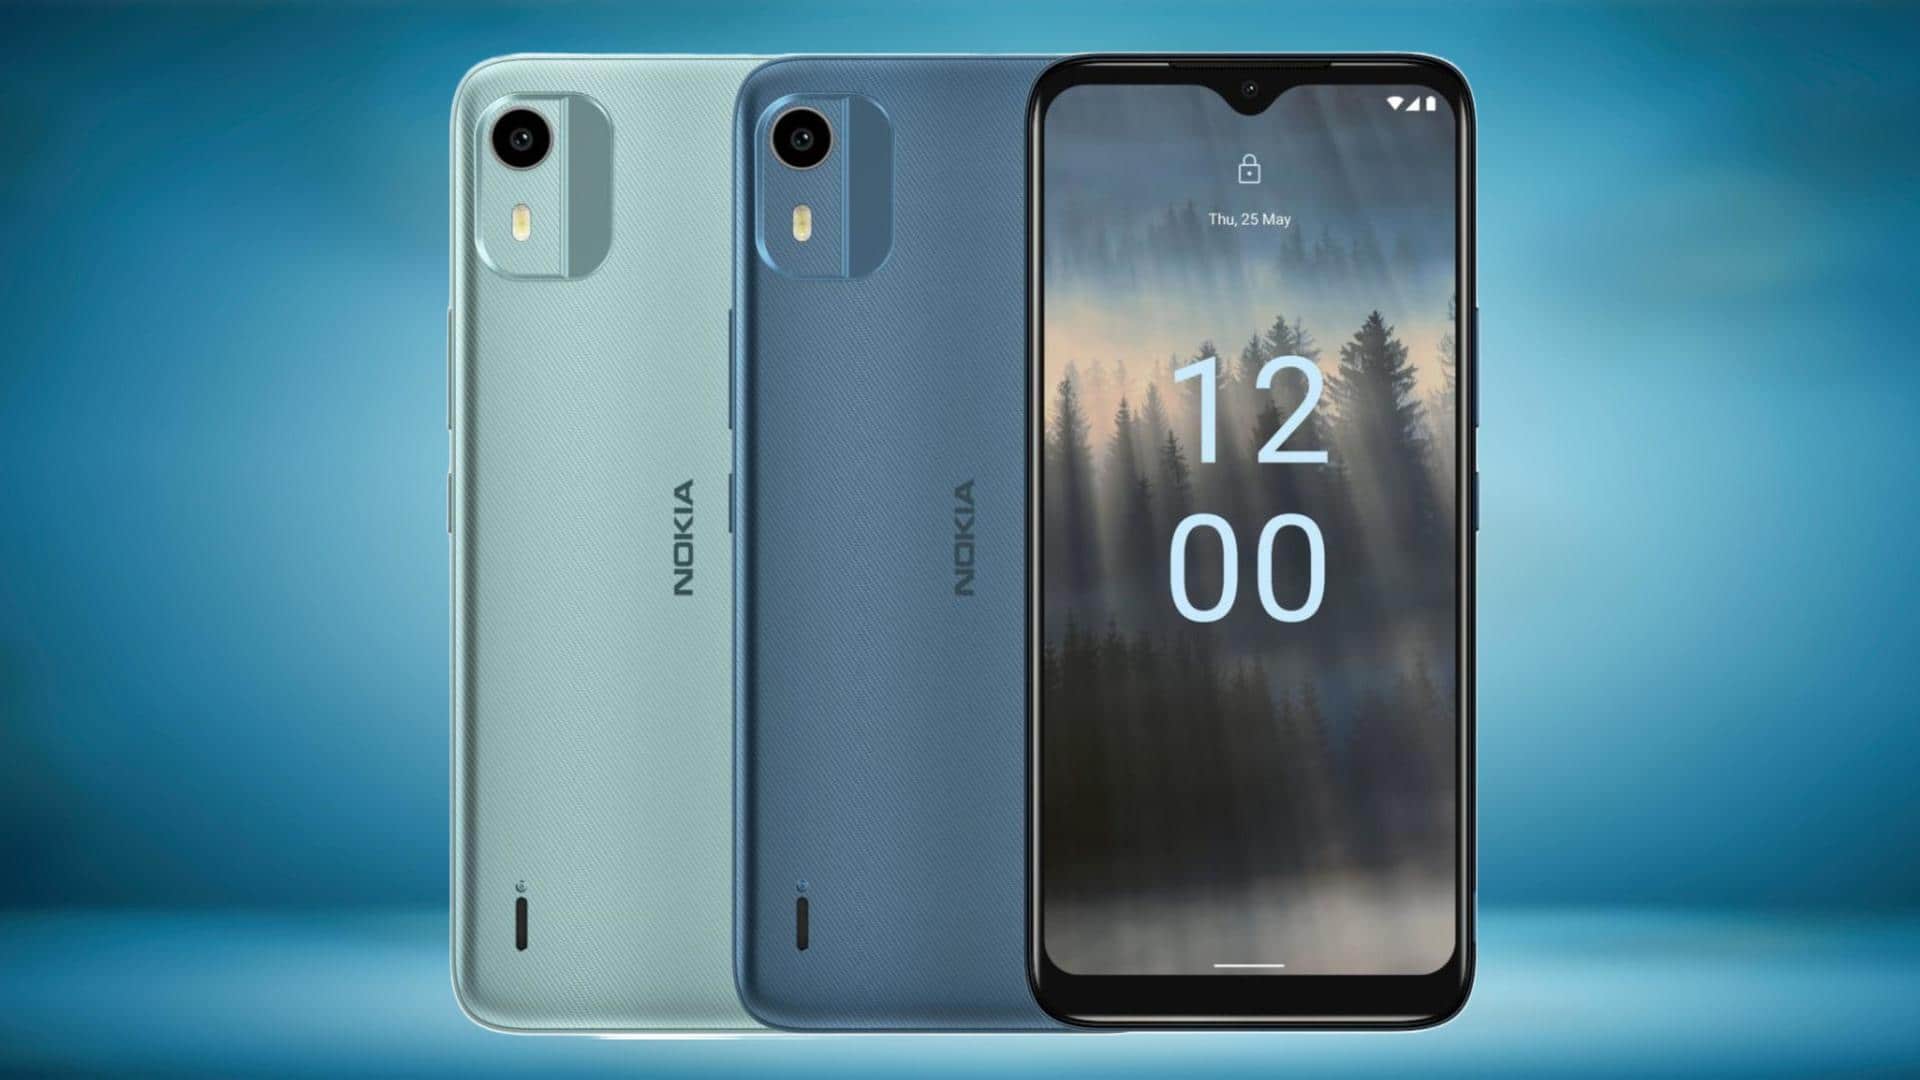 Nokia C12 launched in India at Rs. 6,000: Check specifications